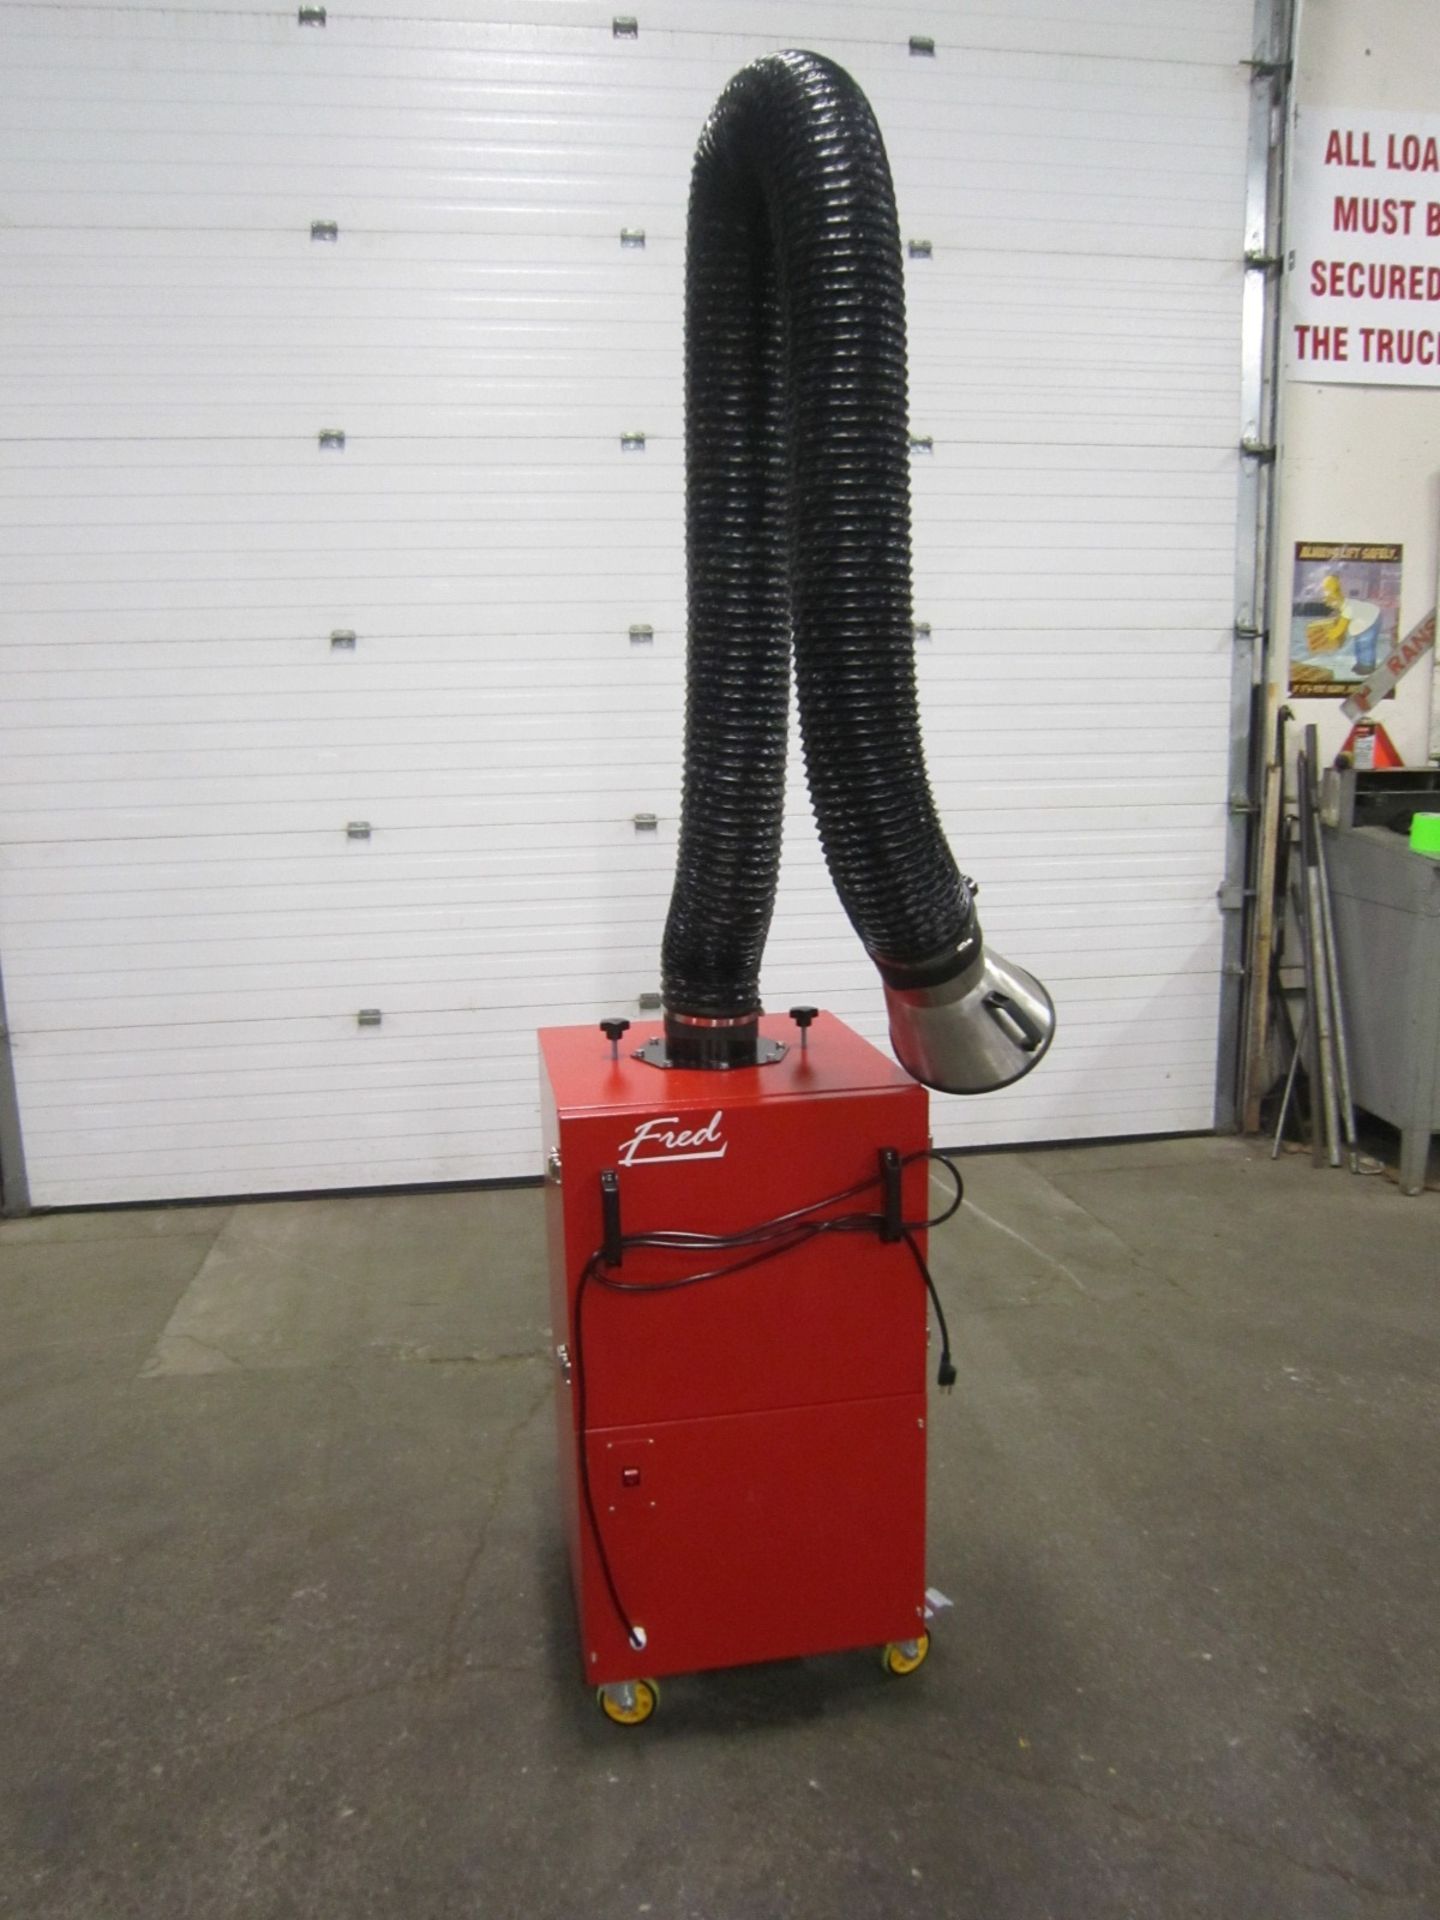 FRED Fume Extractor with long reach snorkel arm - 120V single phase - MINT & UNUSED - CLEAN FILTER